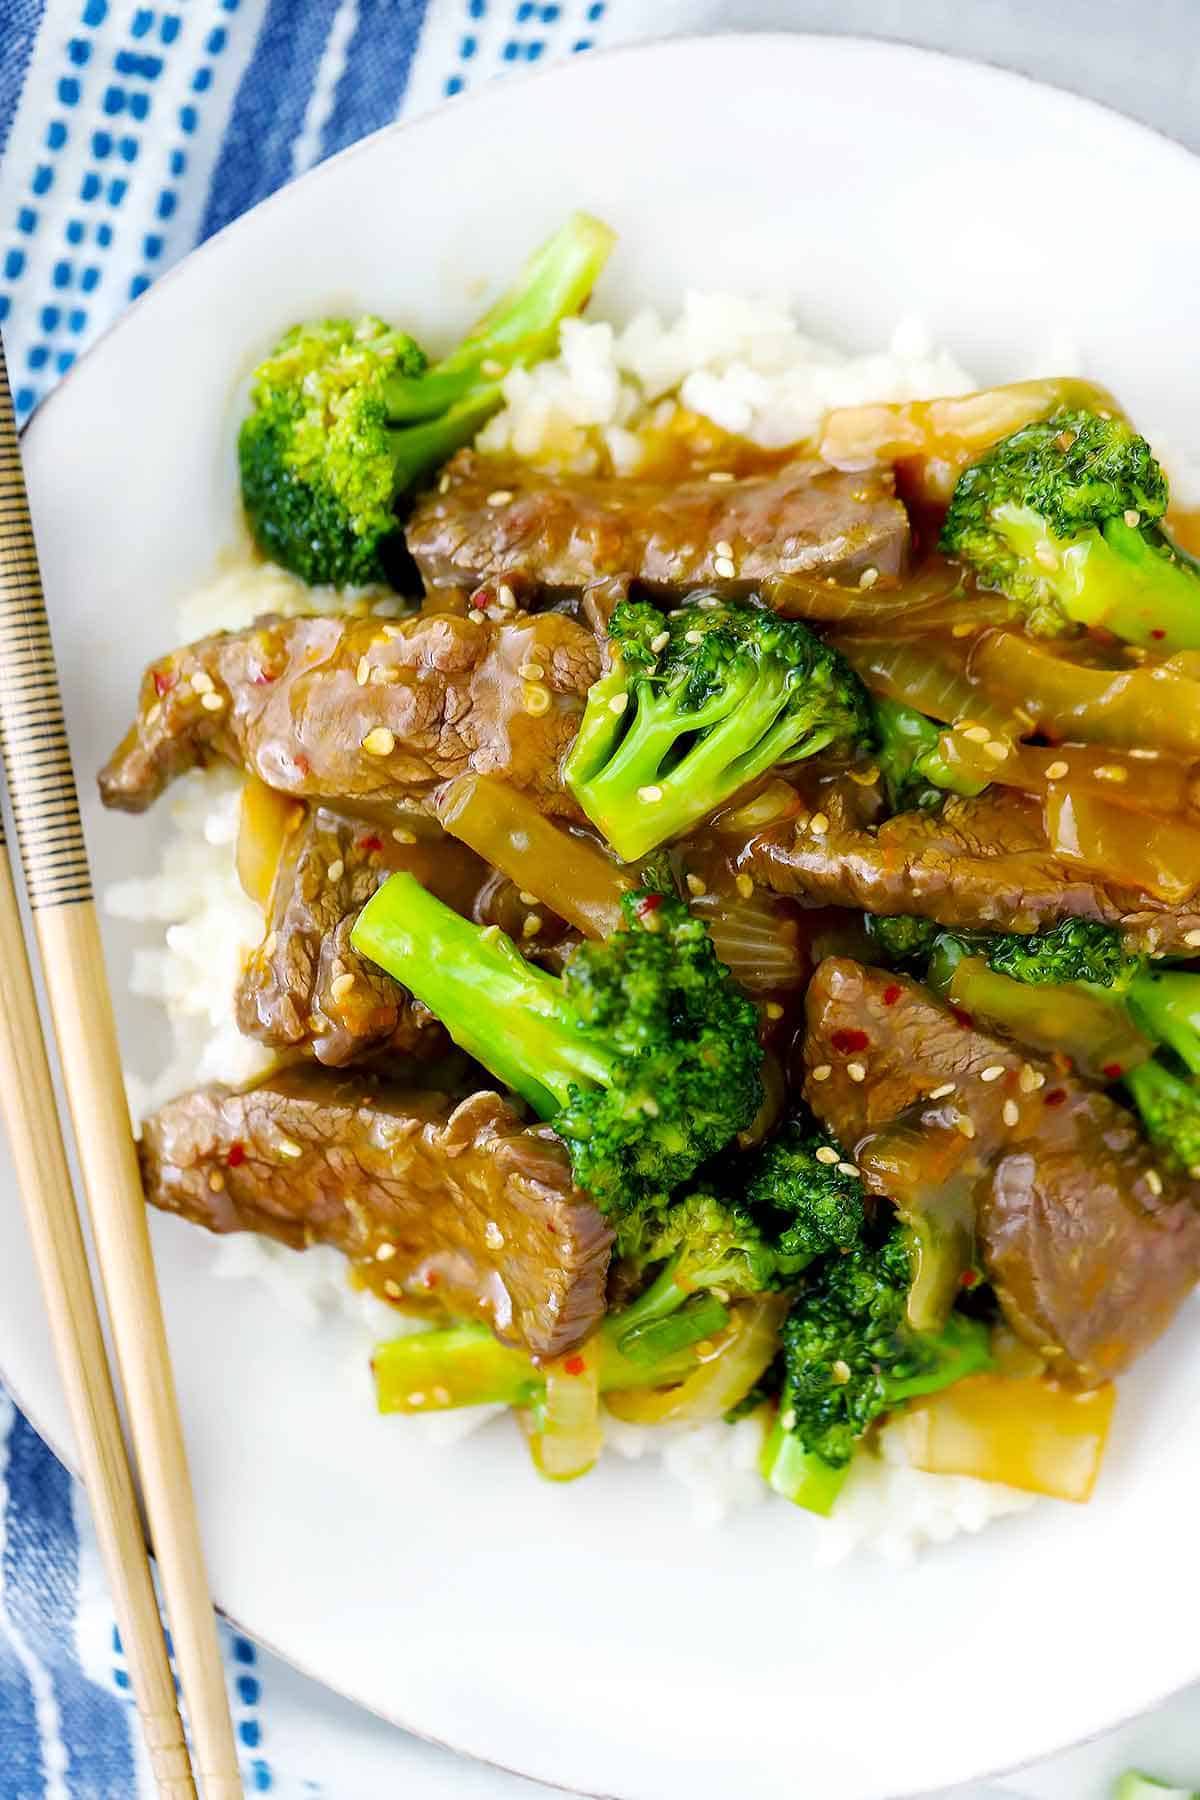 Beef and broccoli on a plate with chopsticks